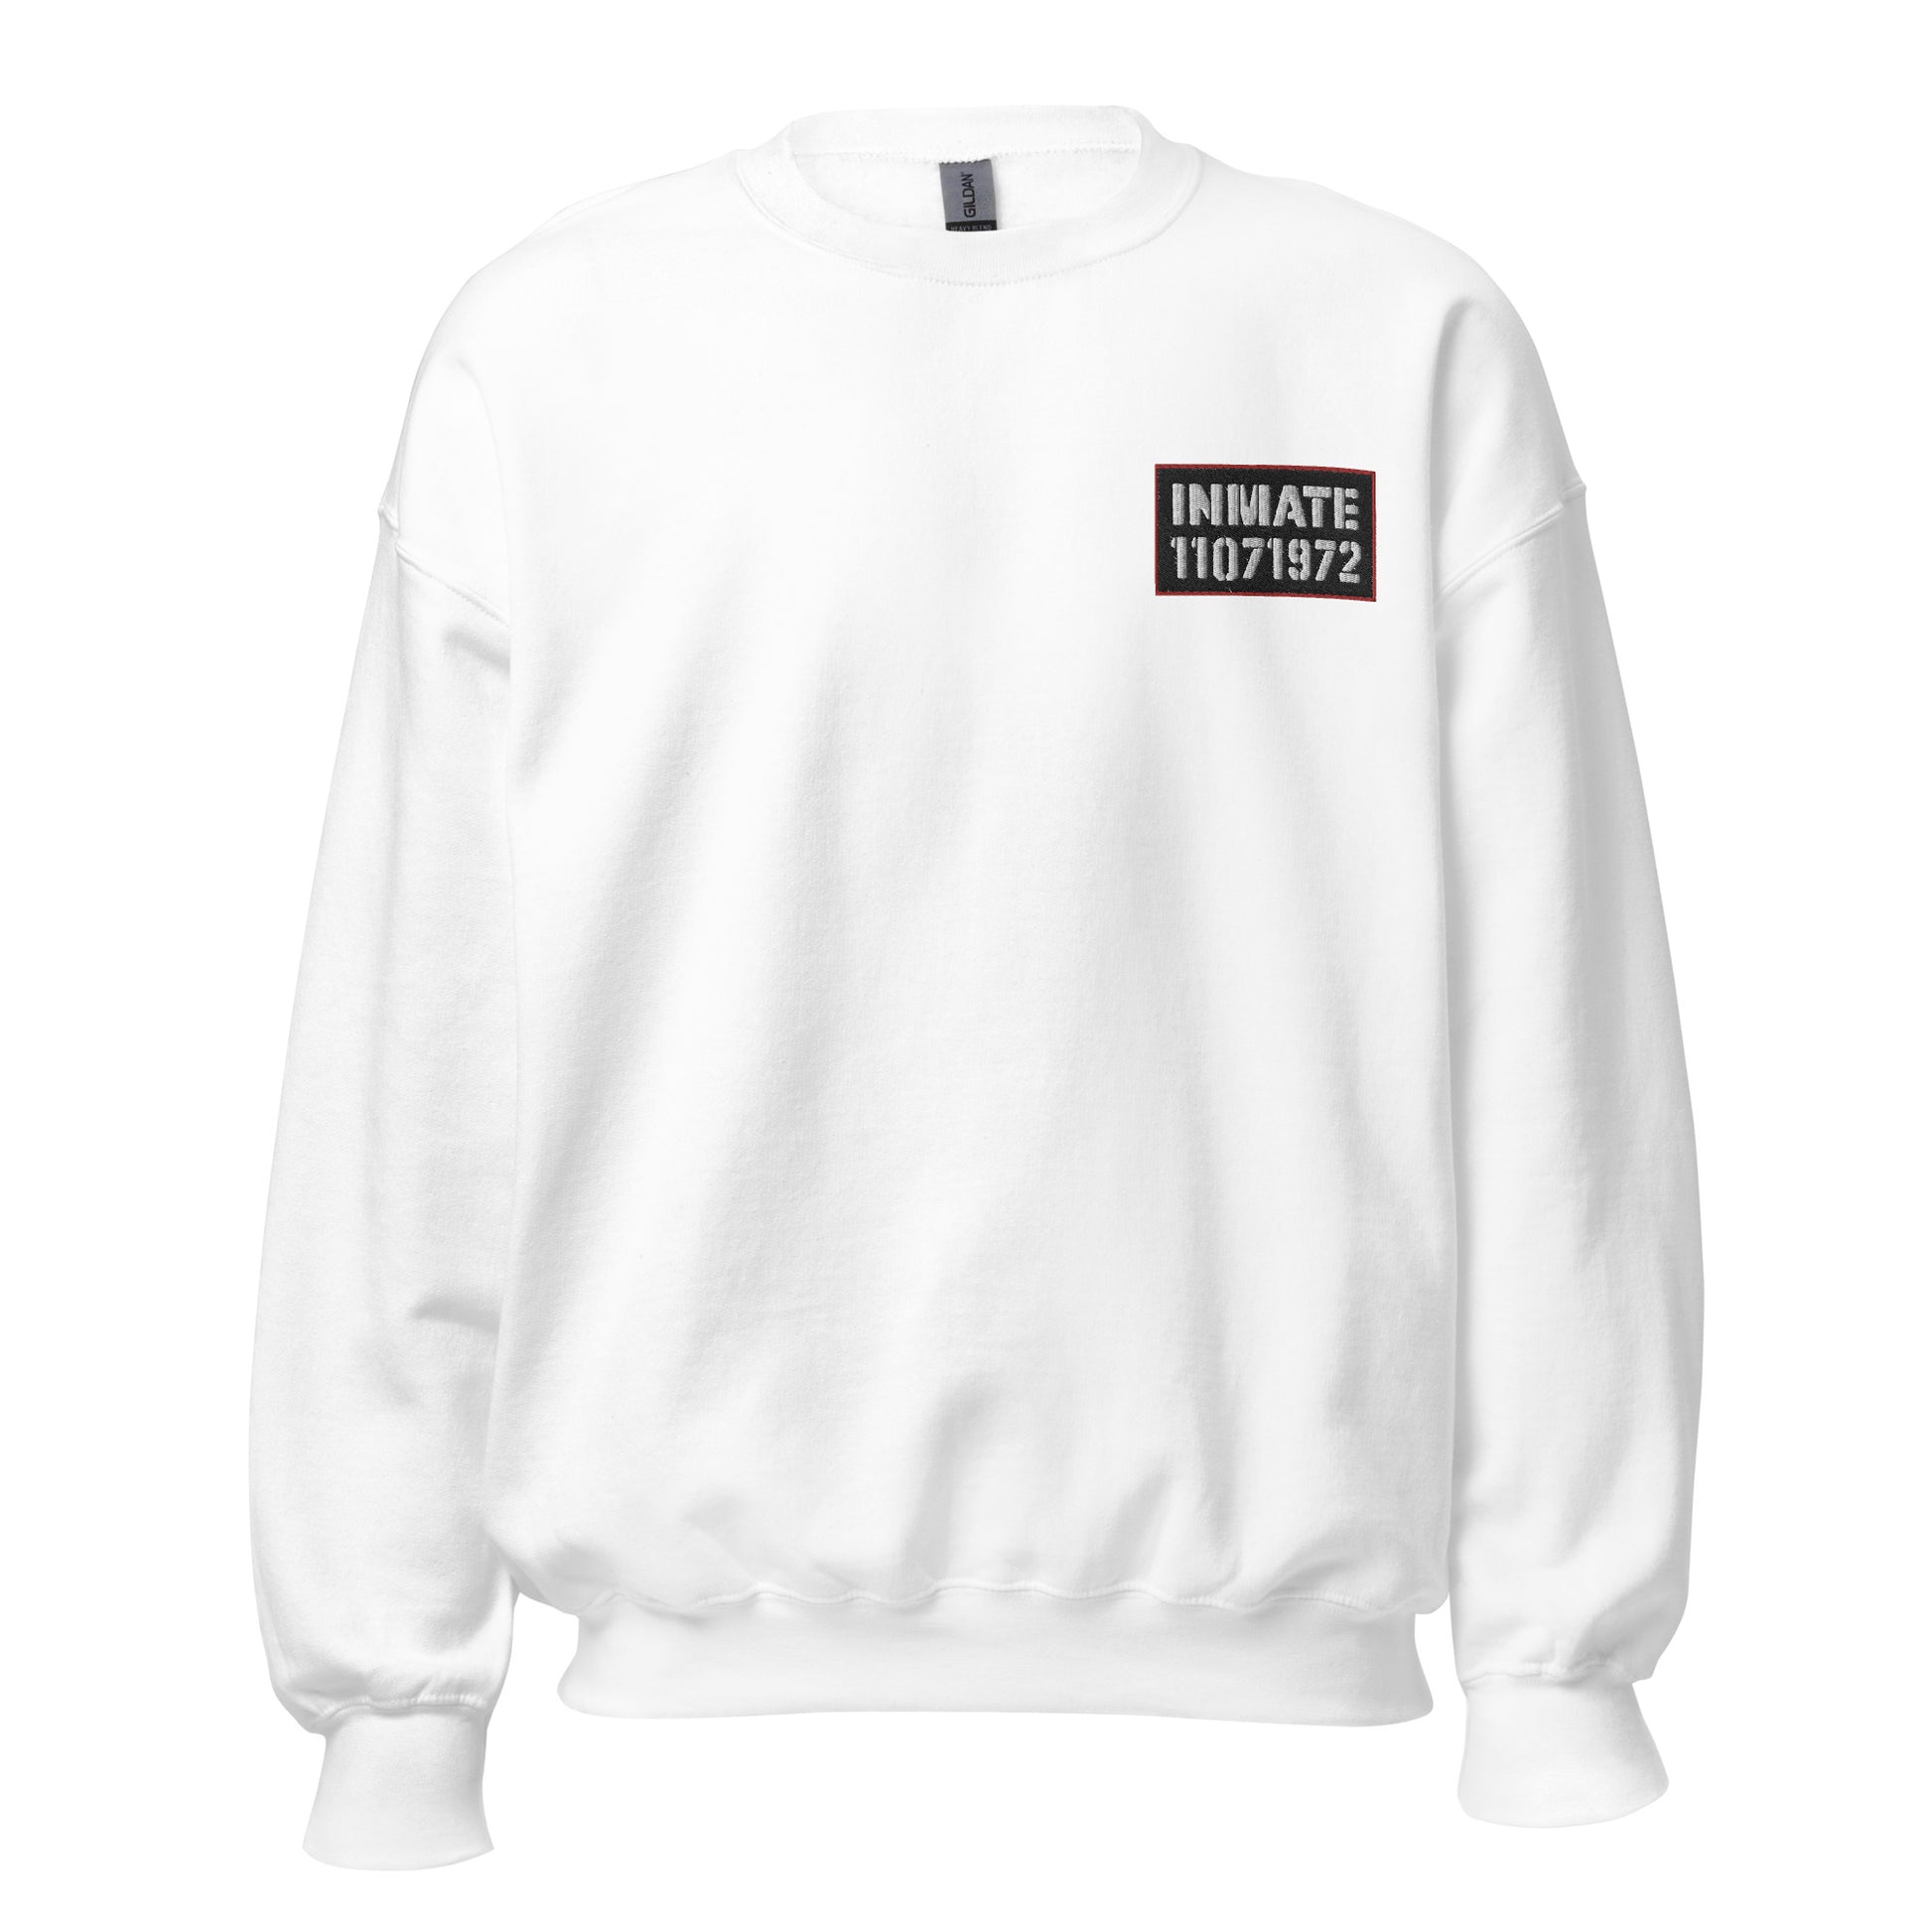 white crewneck sweatshirt with 'Inmate' and an inmate number embroidered on left chest.